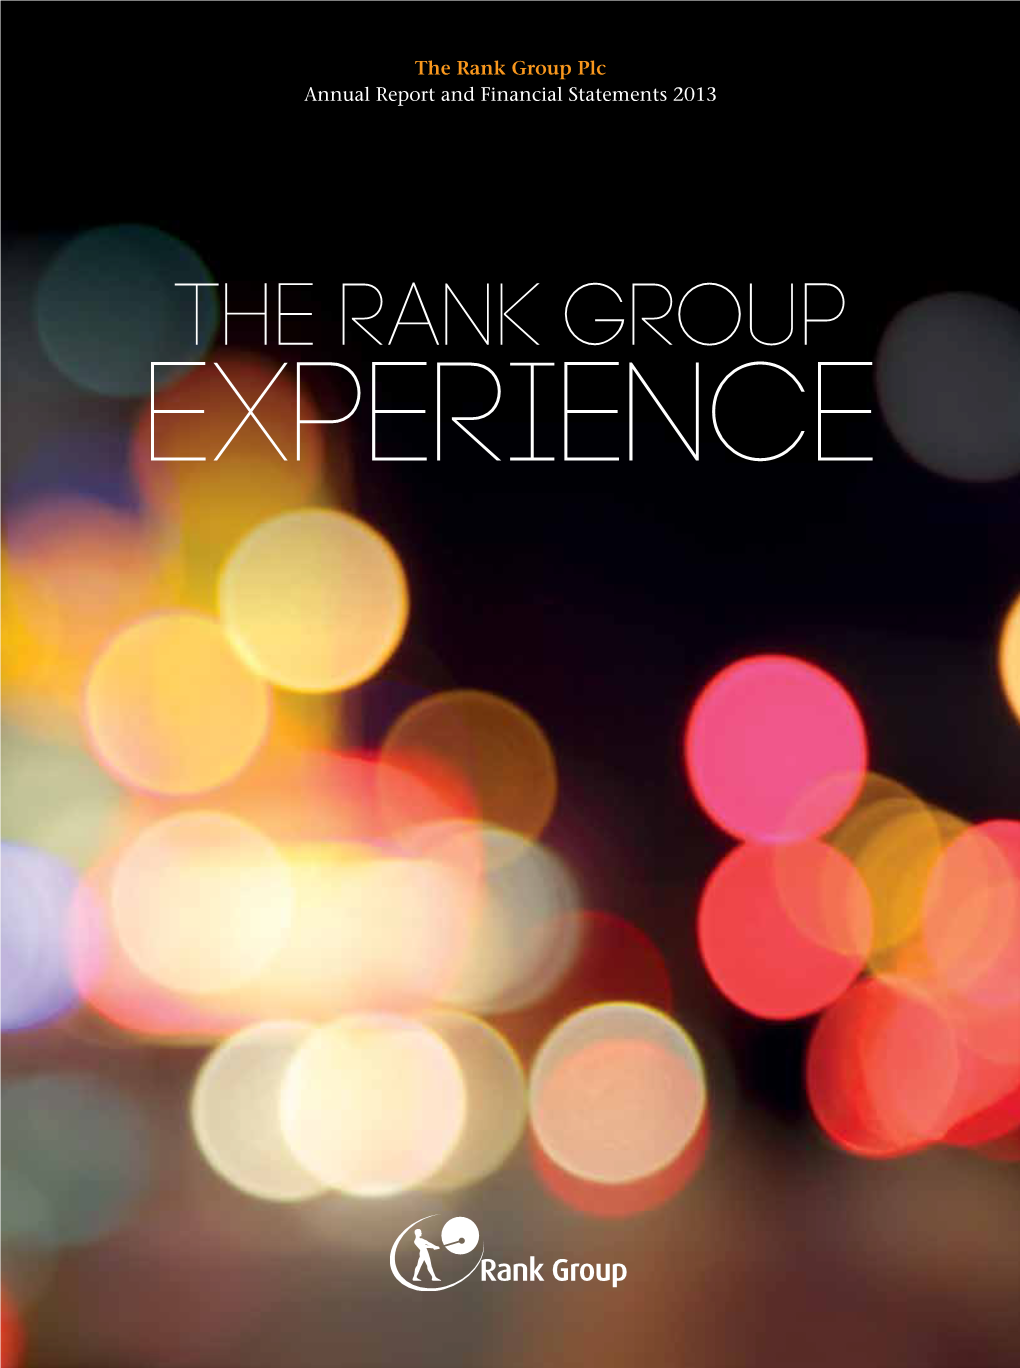 The Rank Group Plc Annual Report and Financial Statements 2013 the Rank Group Plc Annual Report and Financial Statements 2013